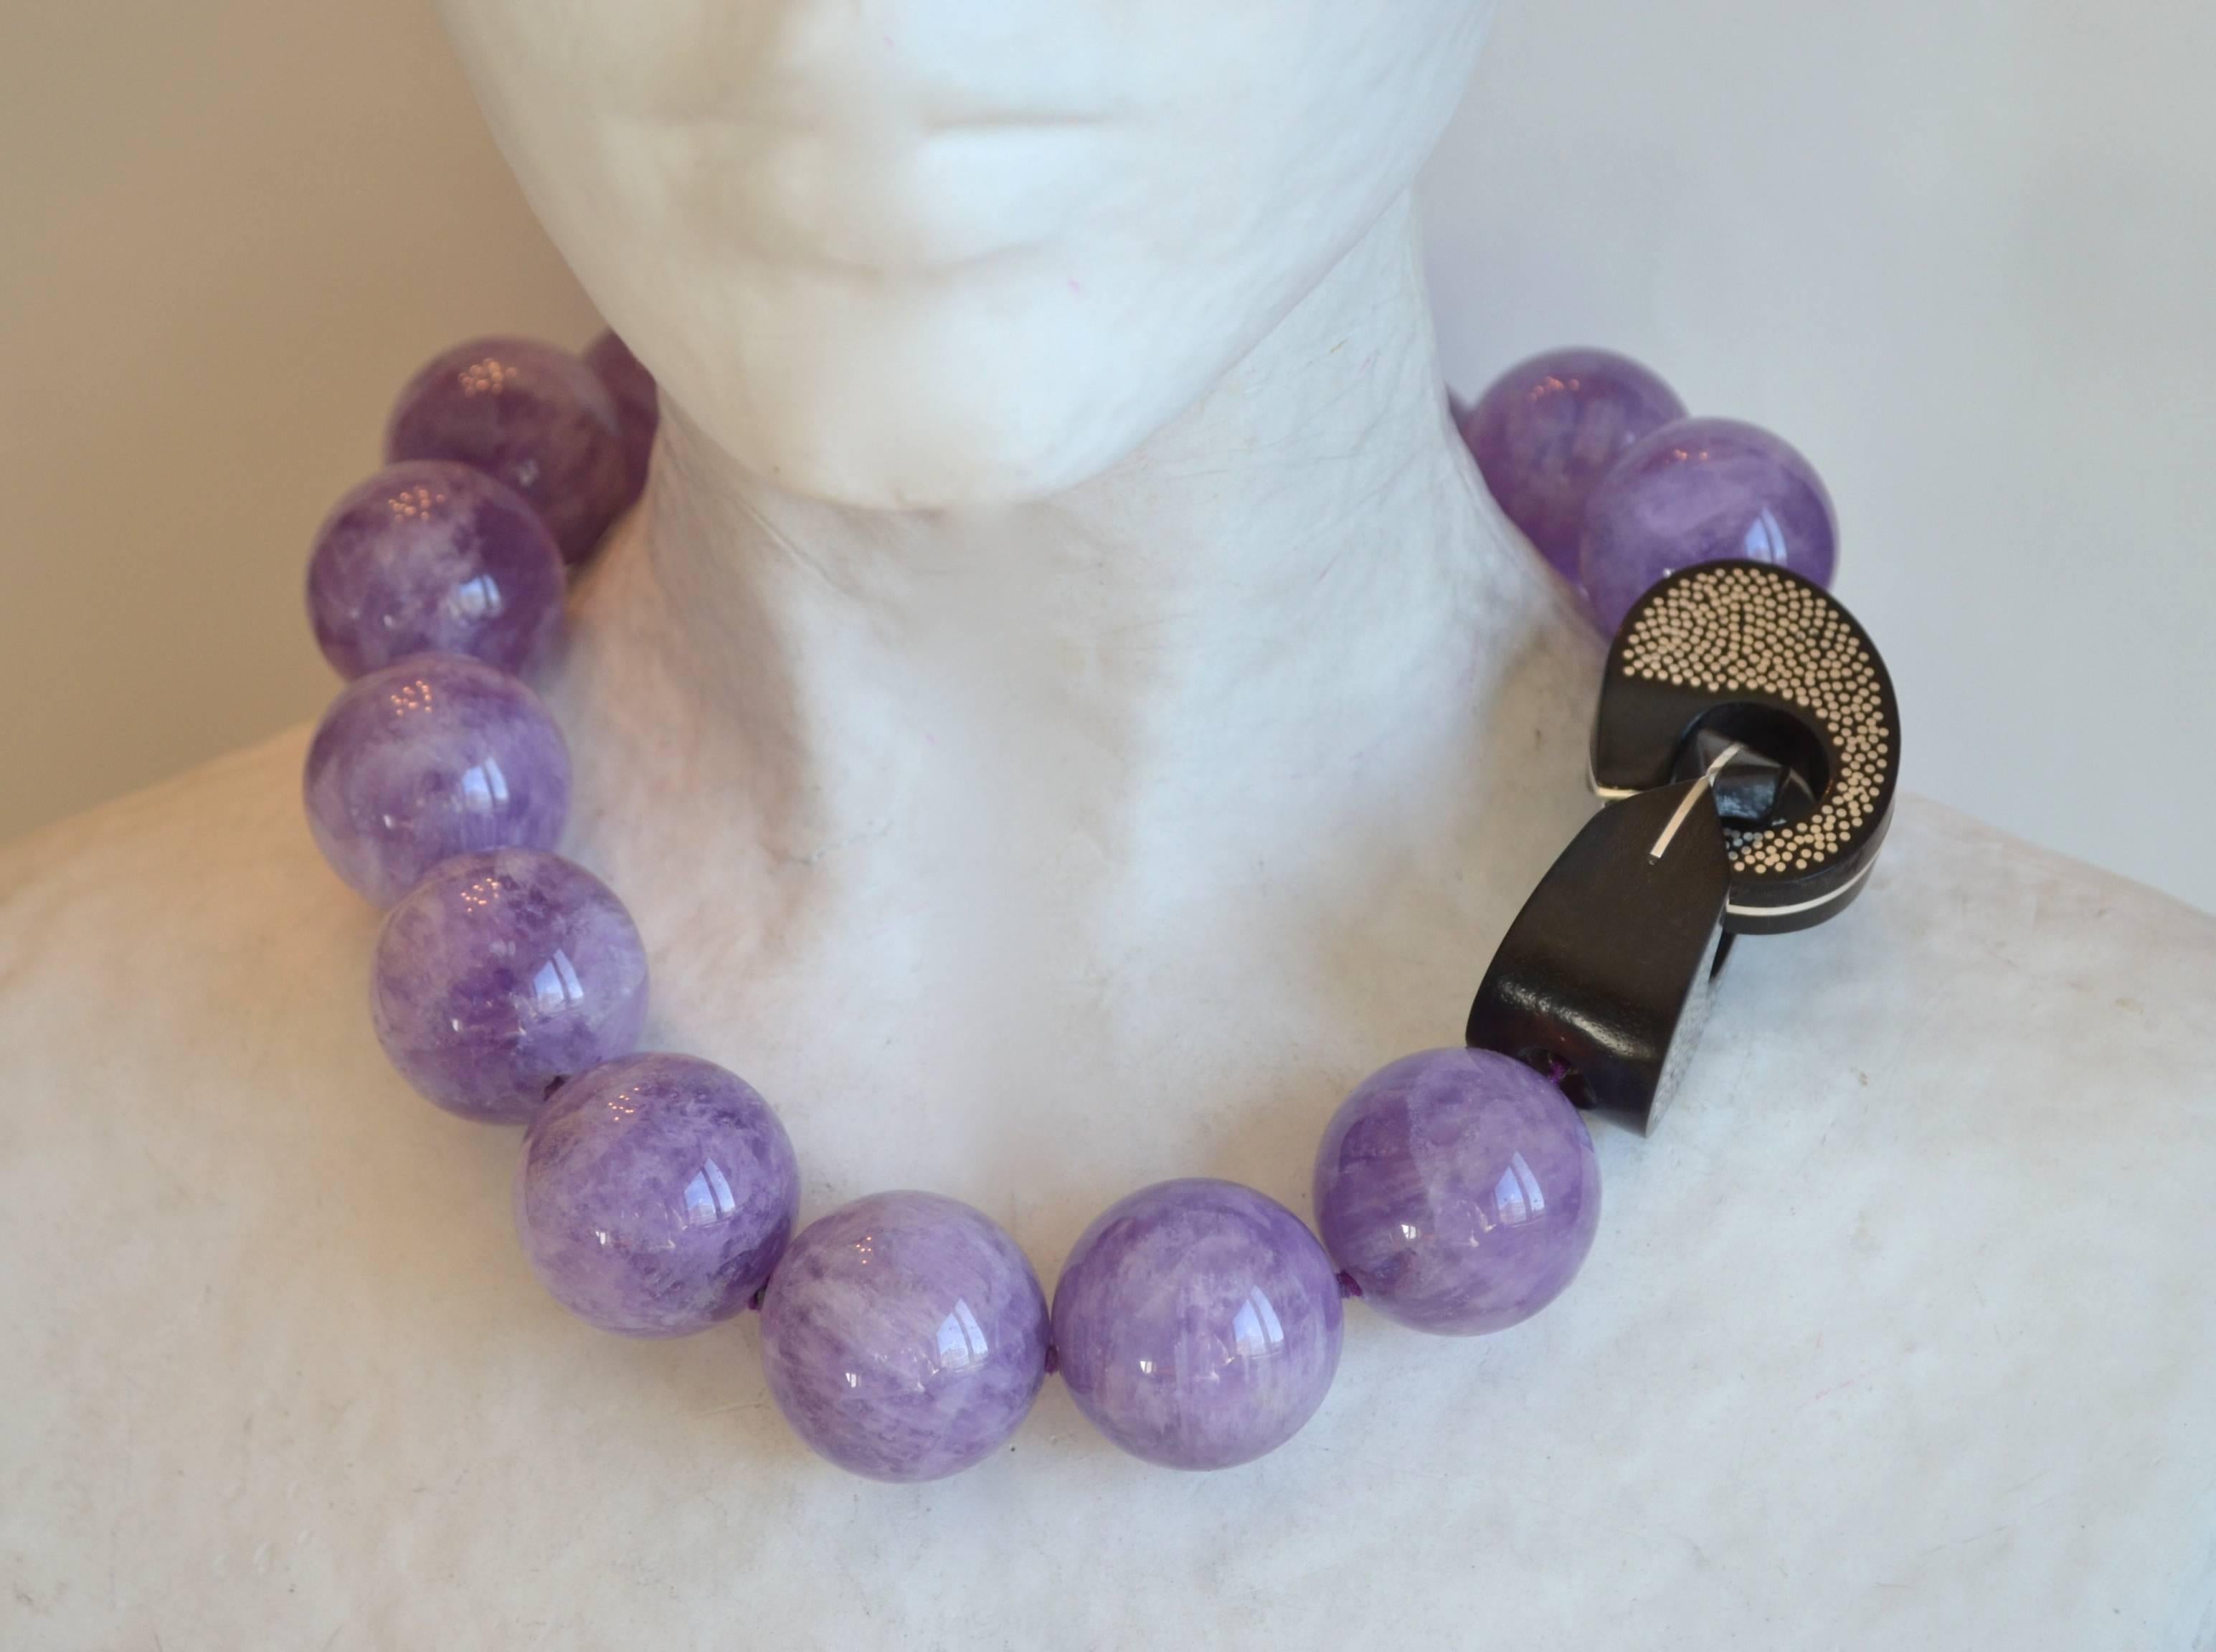 Large amethyst bead necklace with cocobolo wood and silver inlay clasp from Patricia von Musulin. 